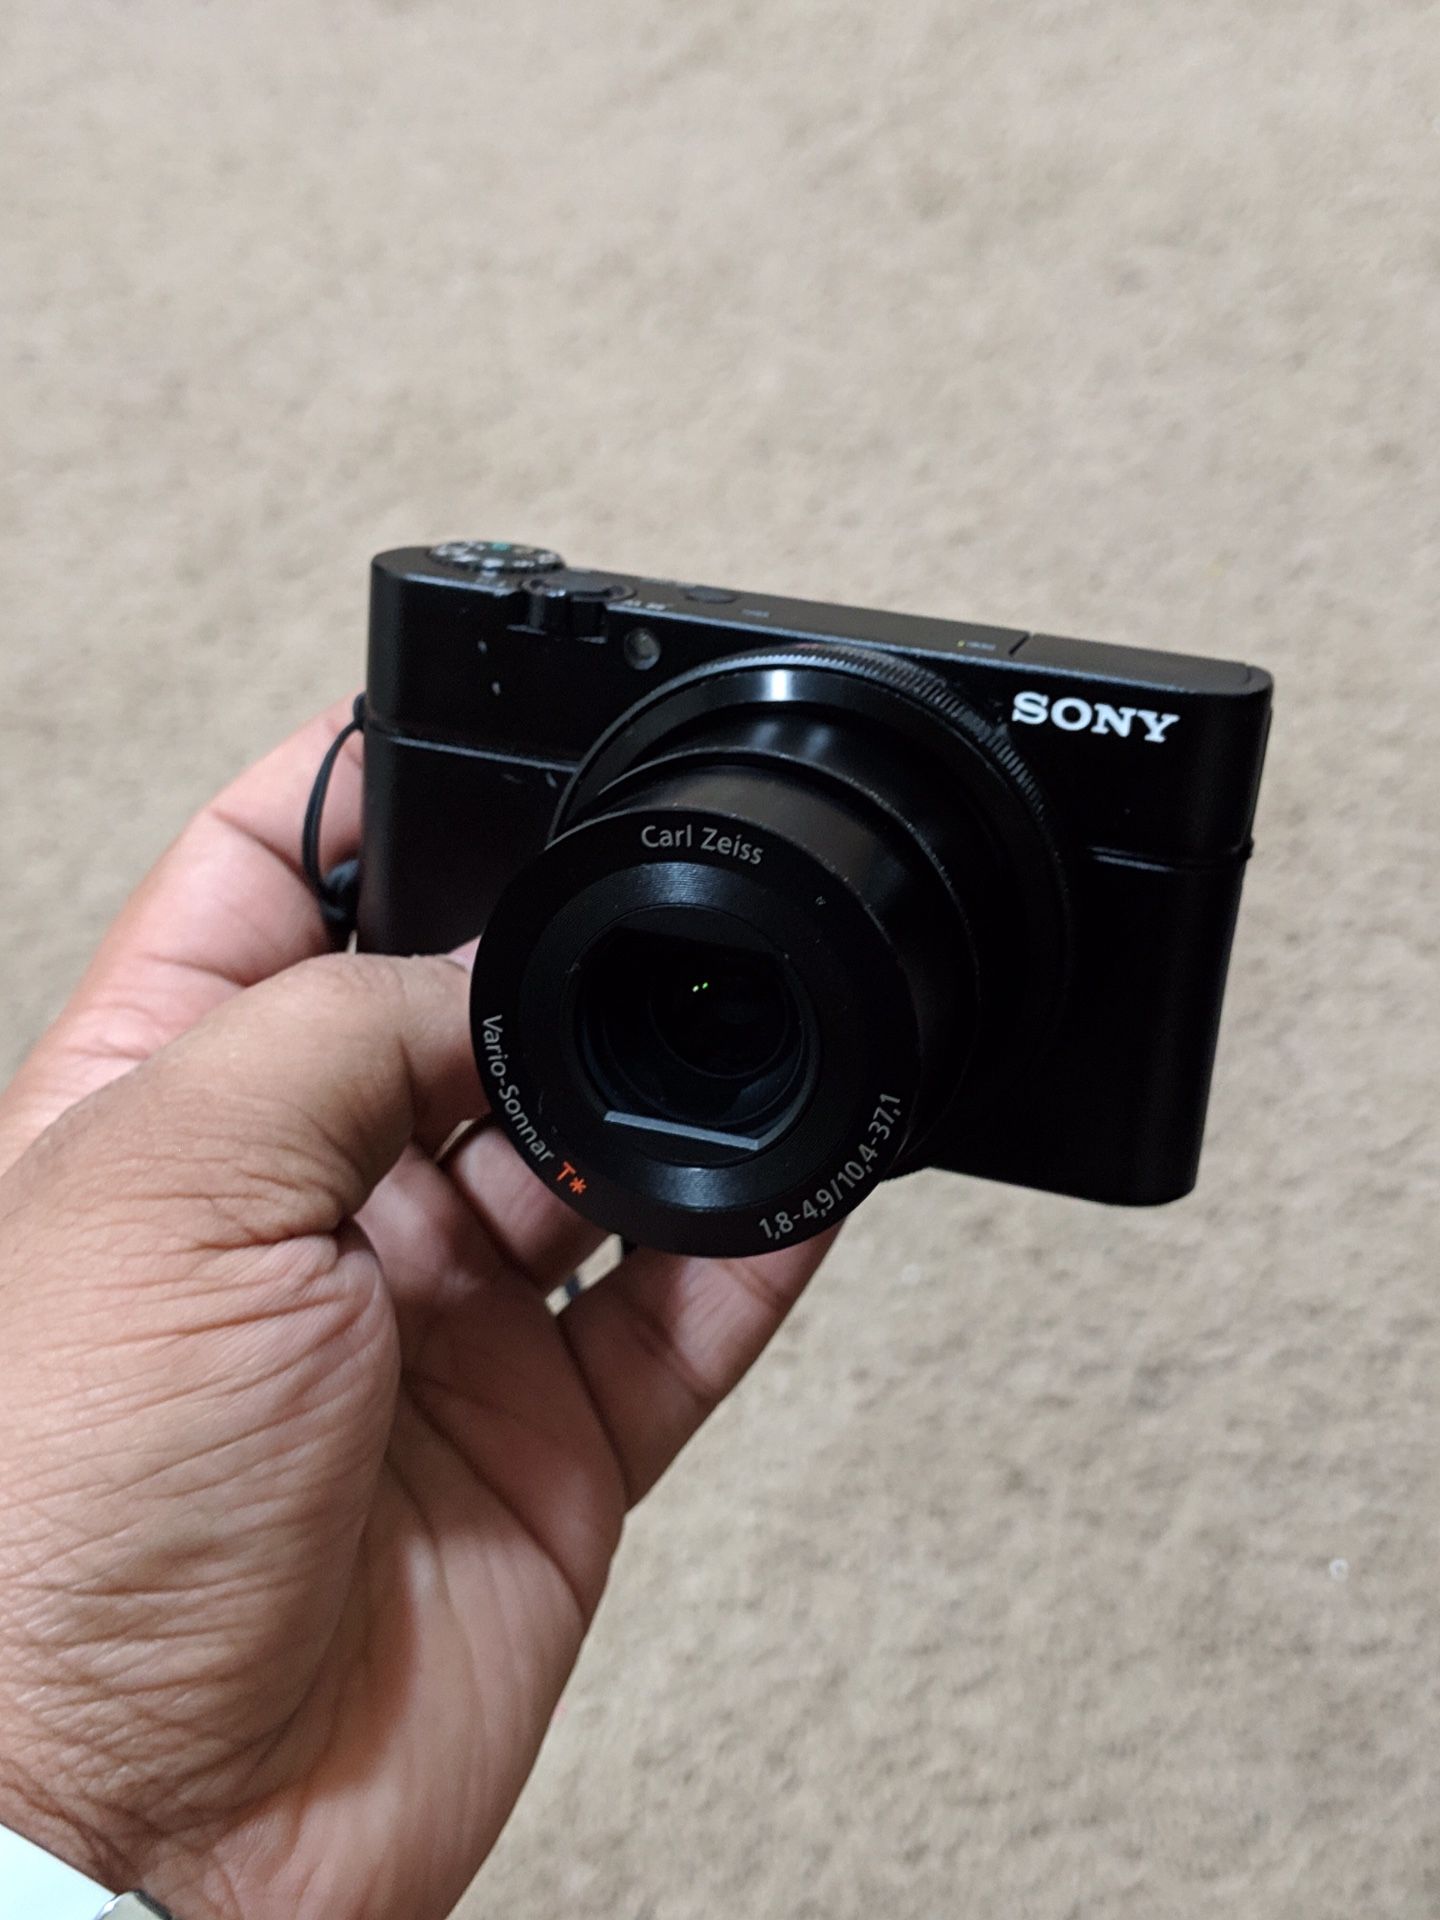 Sony Cyber-shot DSC-RX100 | 20MP 1080p Point and shoot Camera